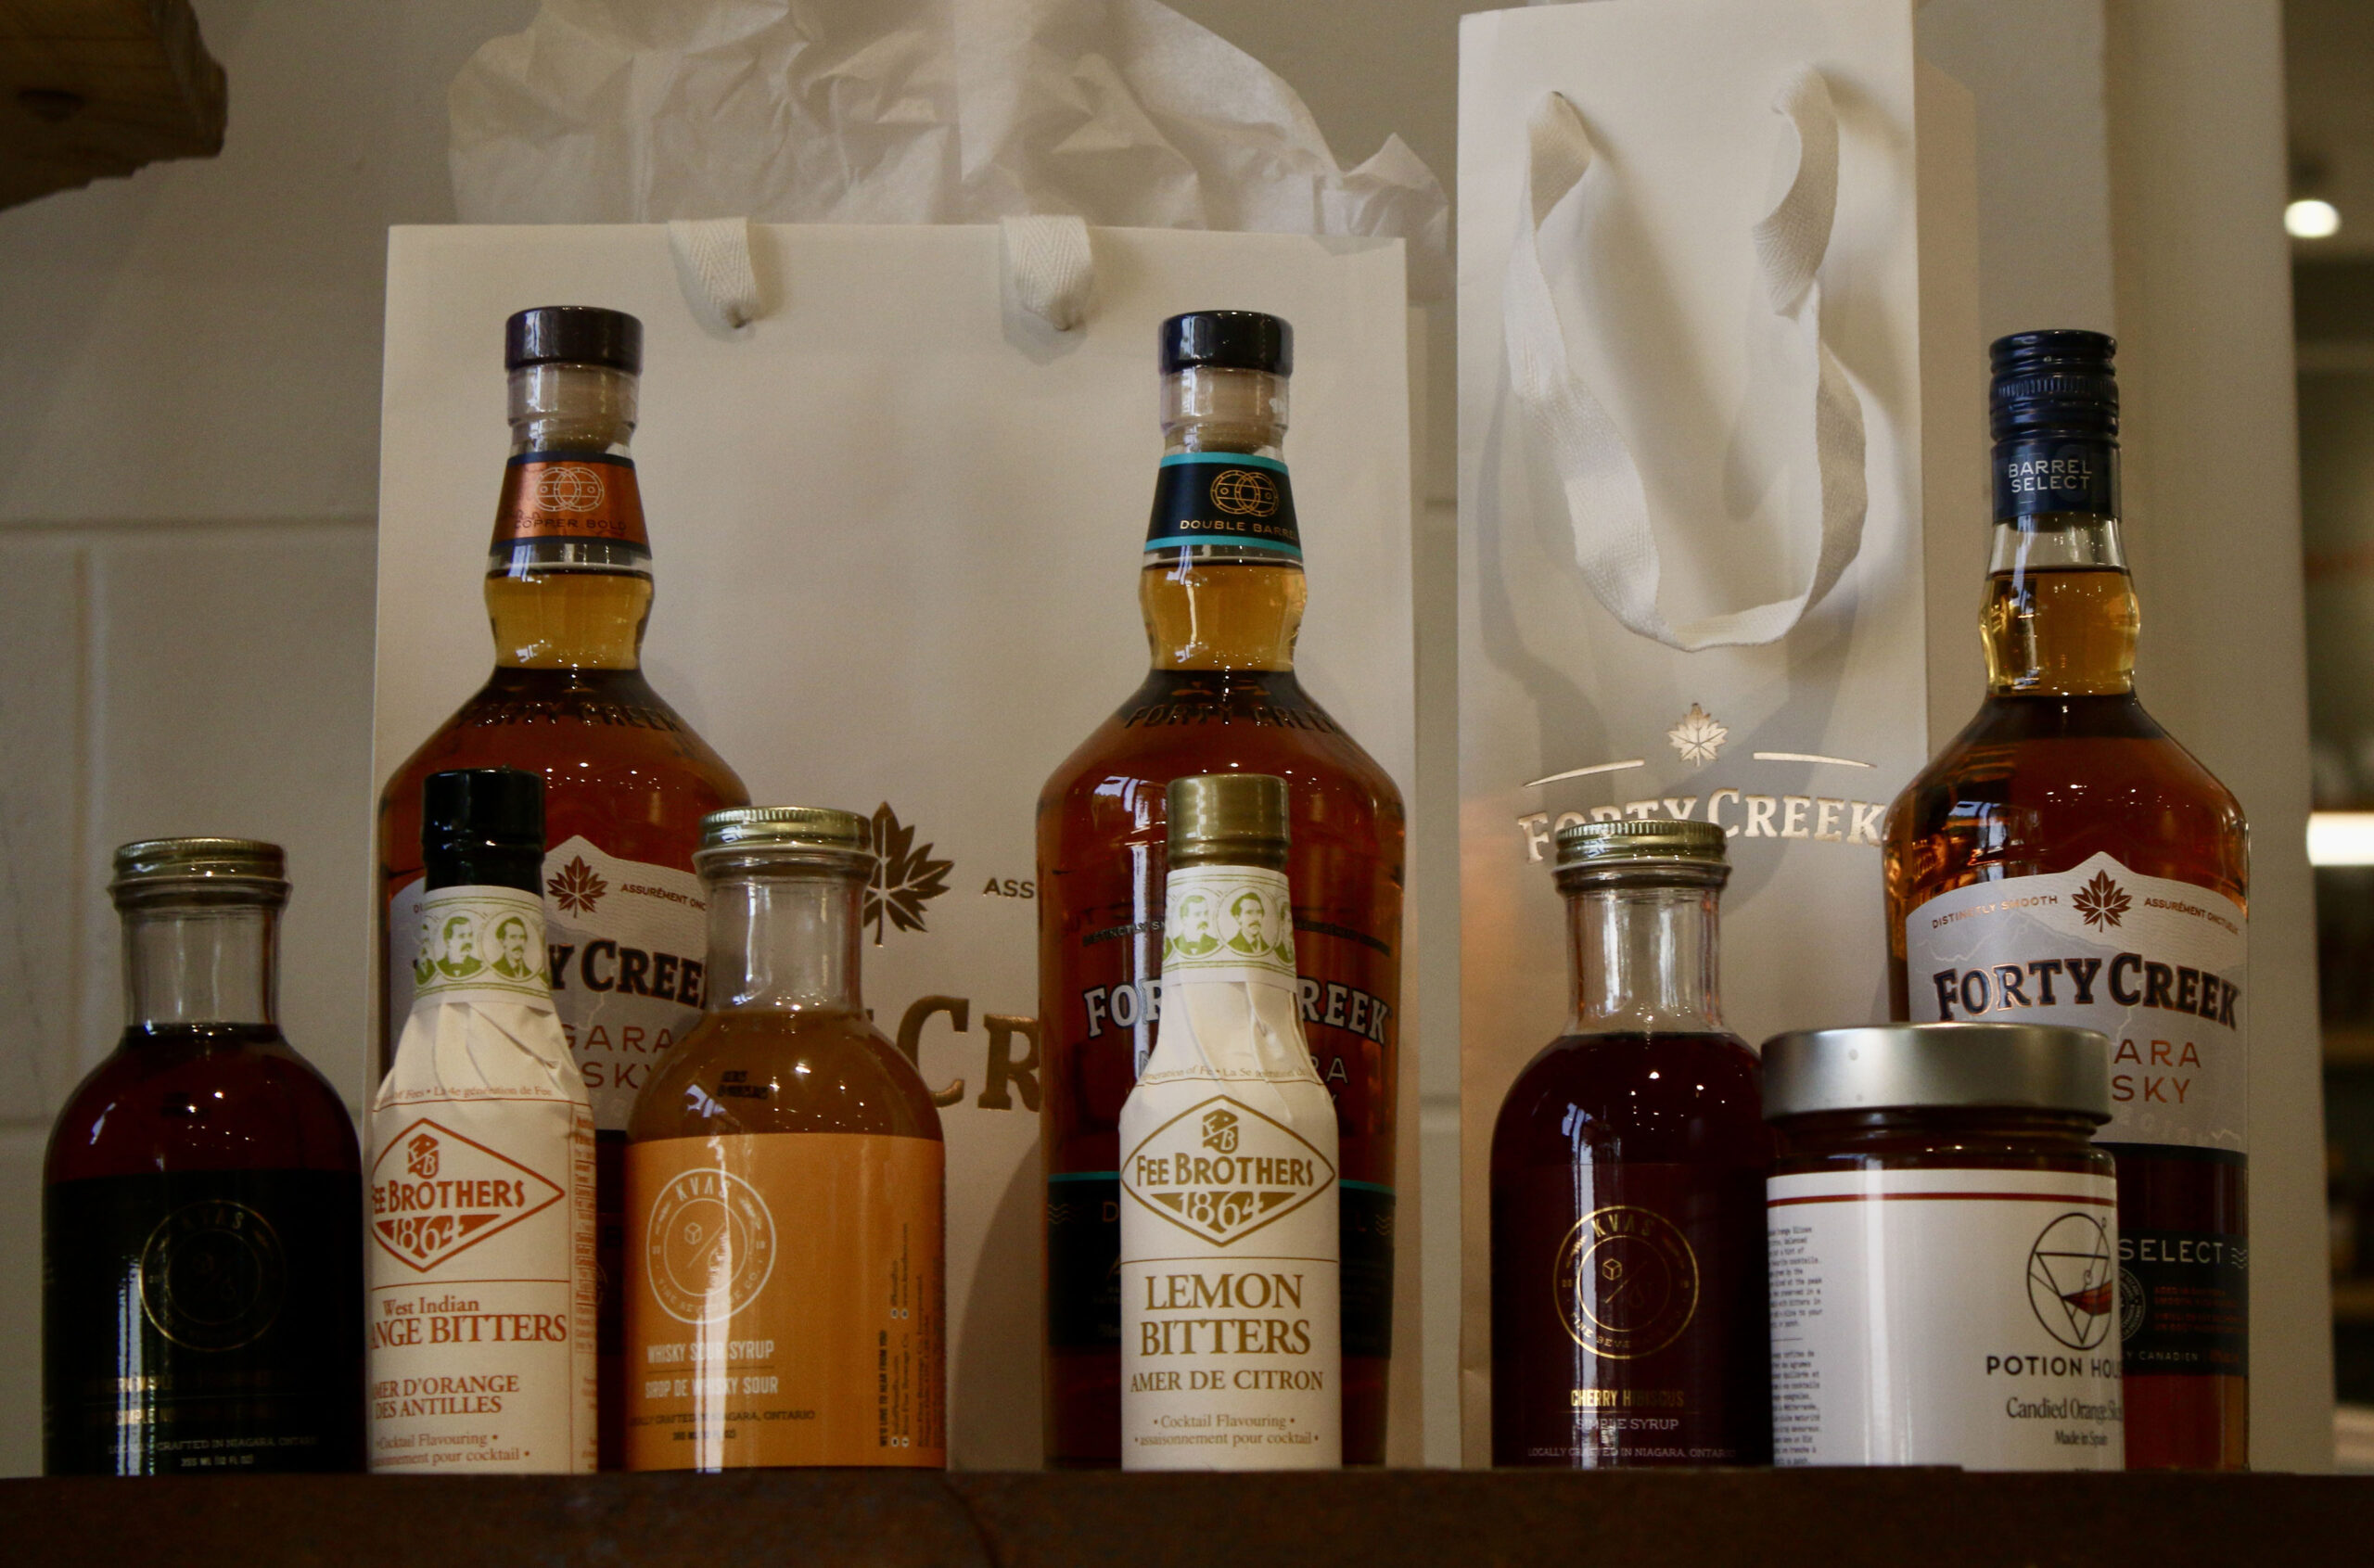 Forty Creek published a variety of cocktail recipes, including the famous Forty Old Fashioned.